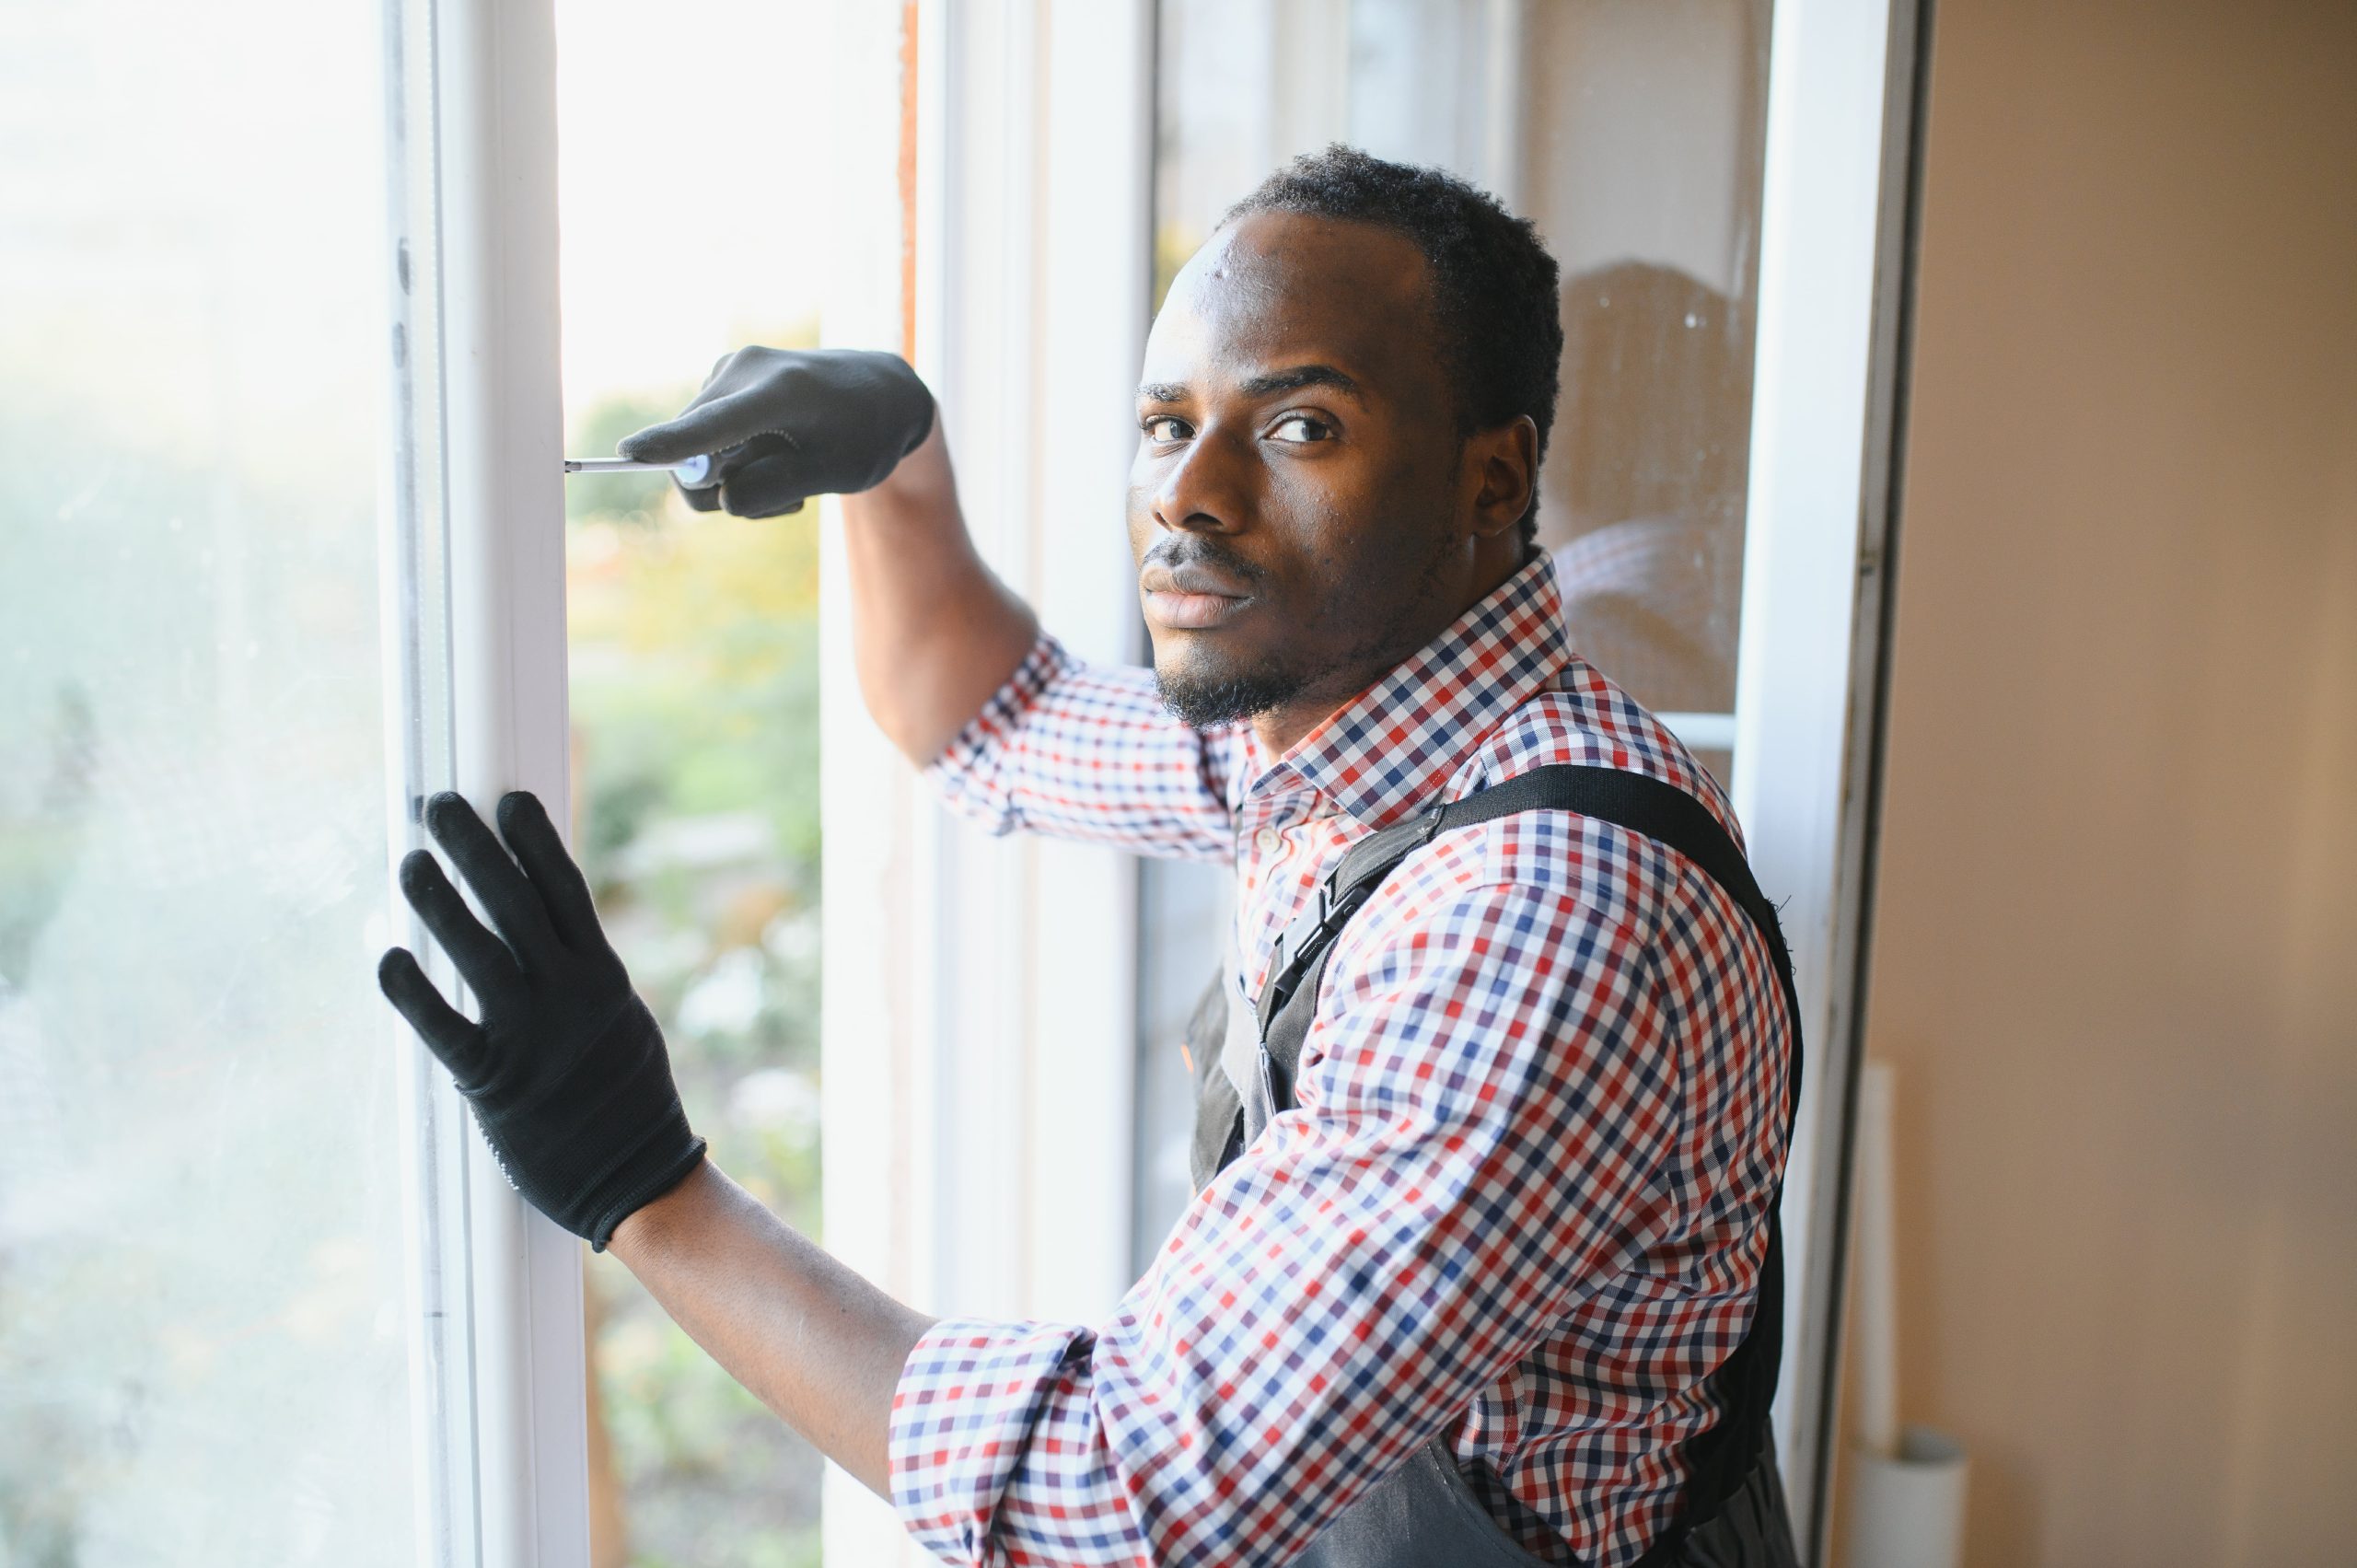 Window Repair vs Replacement: Which Option is Best for Your Home in Milton Keynes?